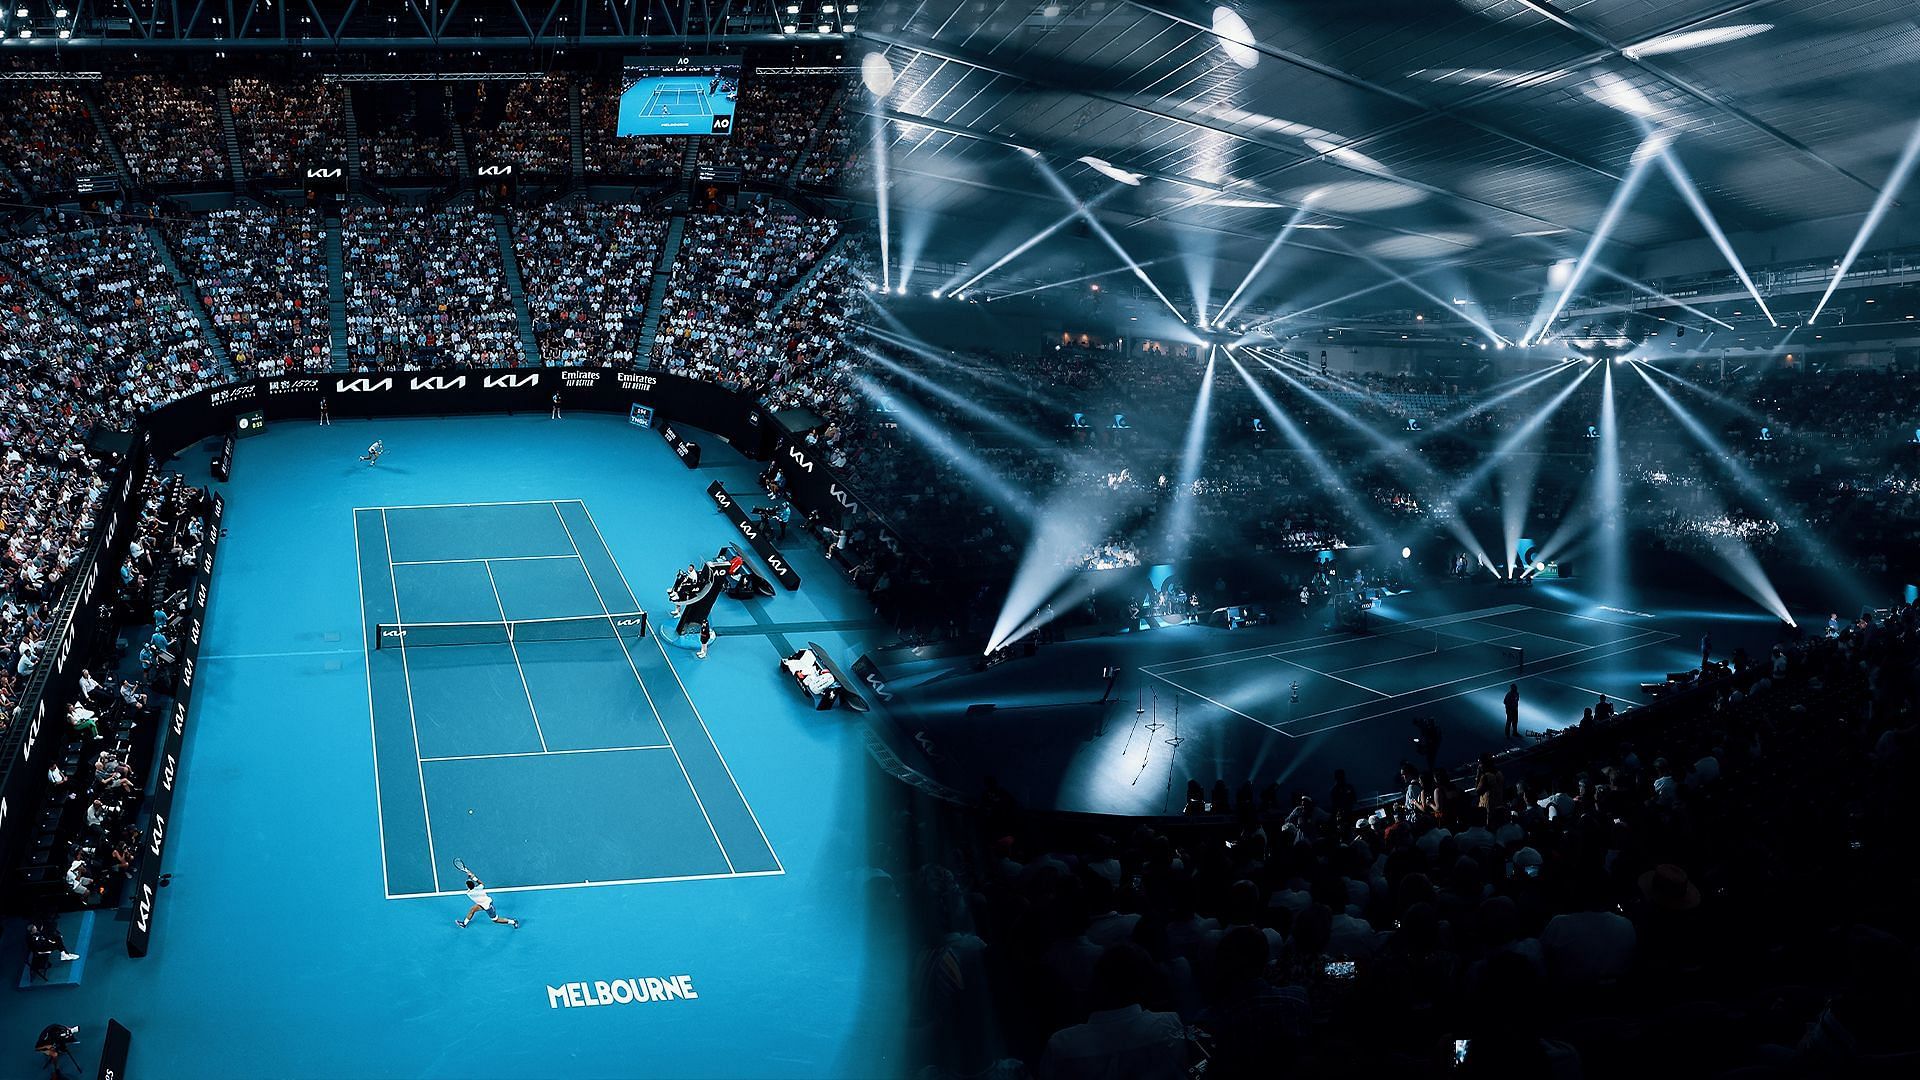 The Australian Open 2023 was its 111th edition